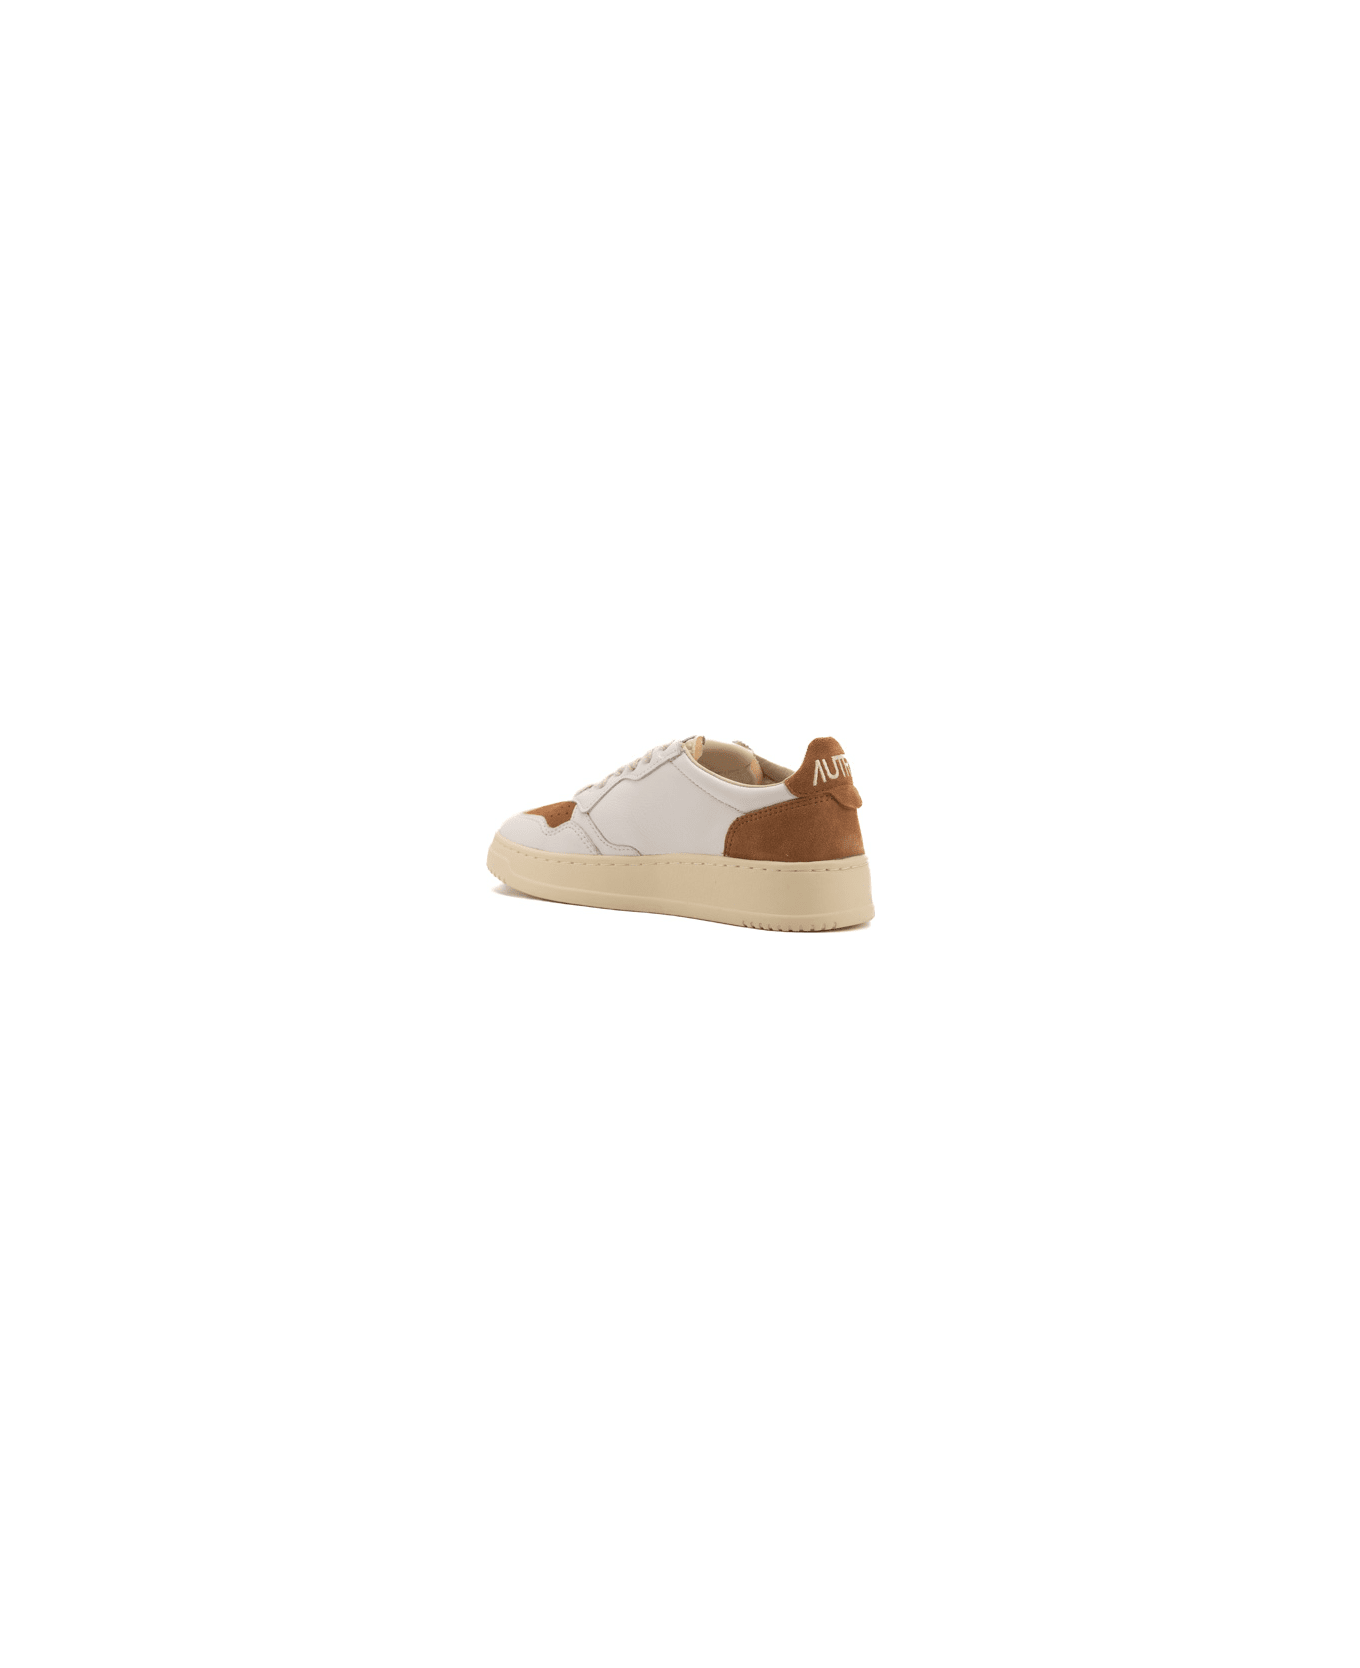 Autry Medalist Low Sneakers - Wht/crml